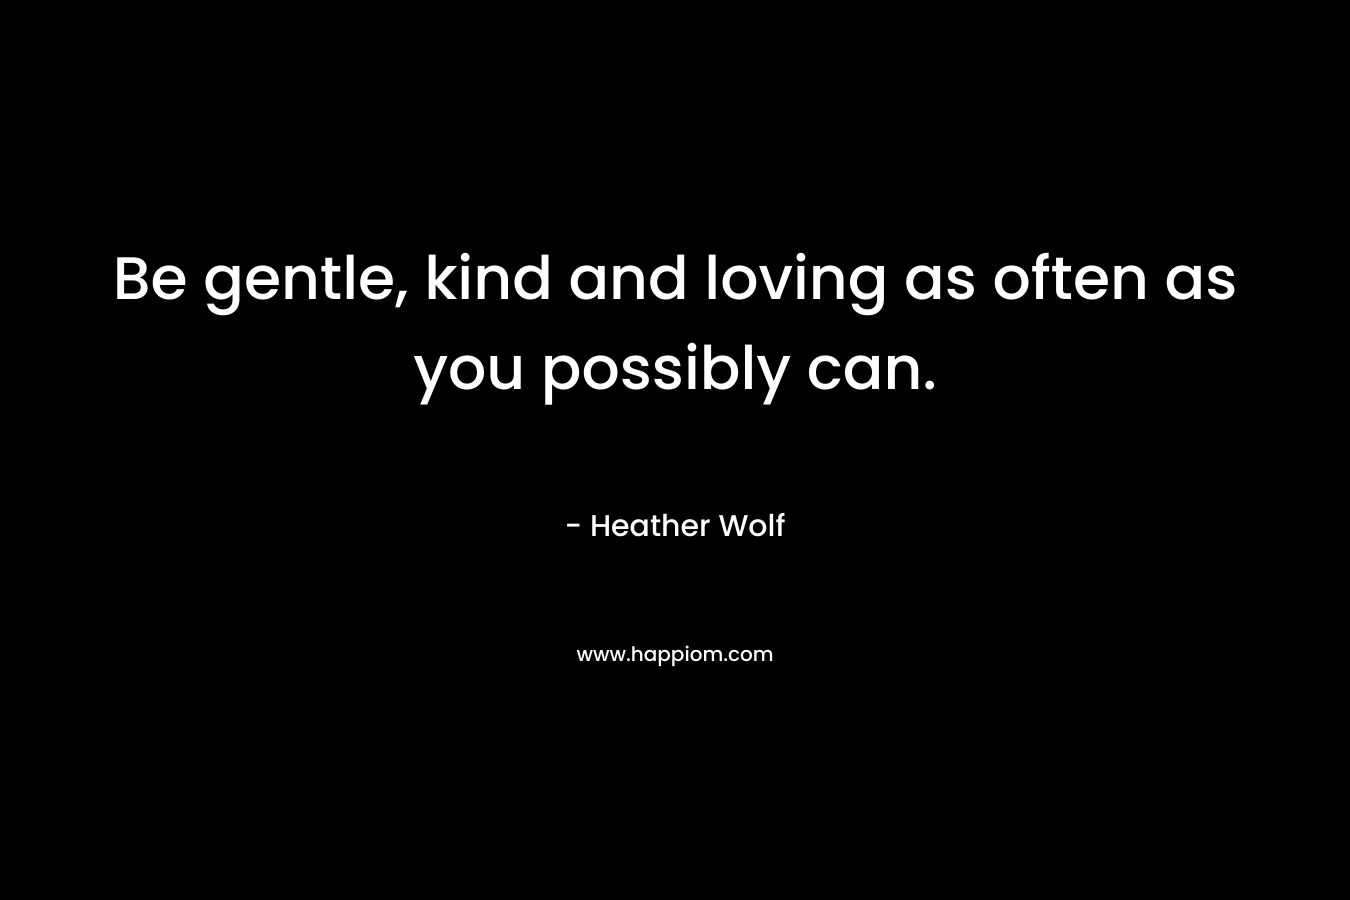 Be gentle, kind and loving as often as you possibly can.